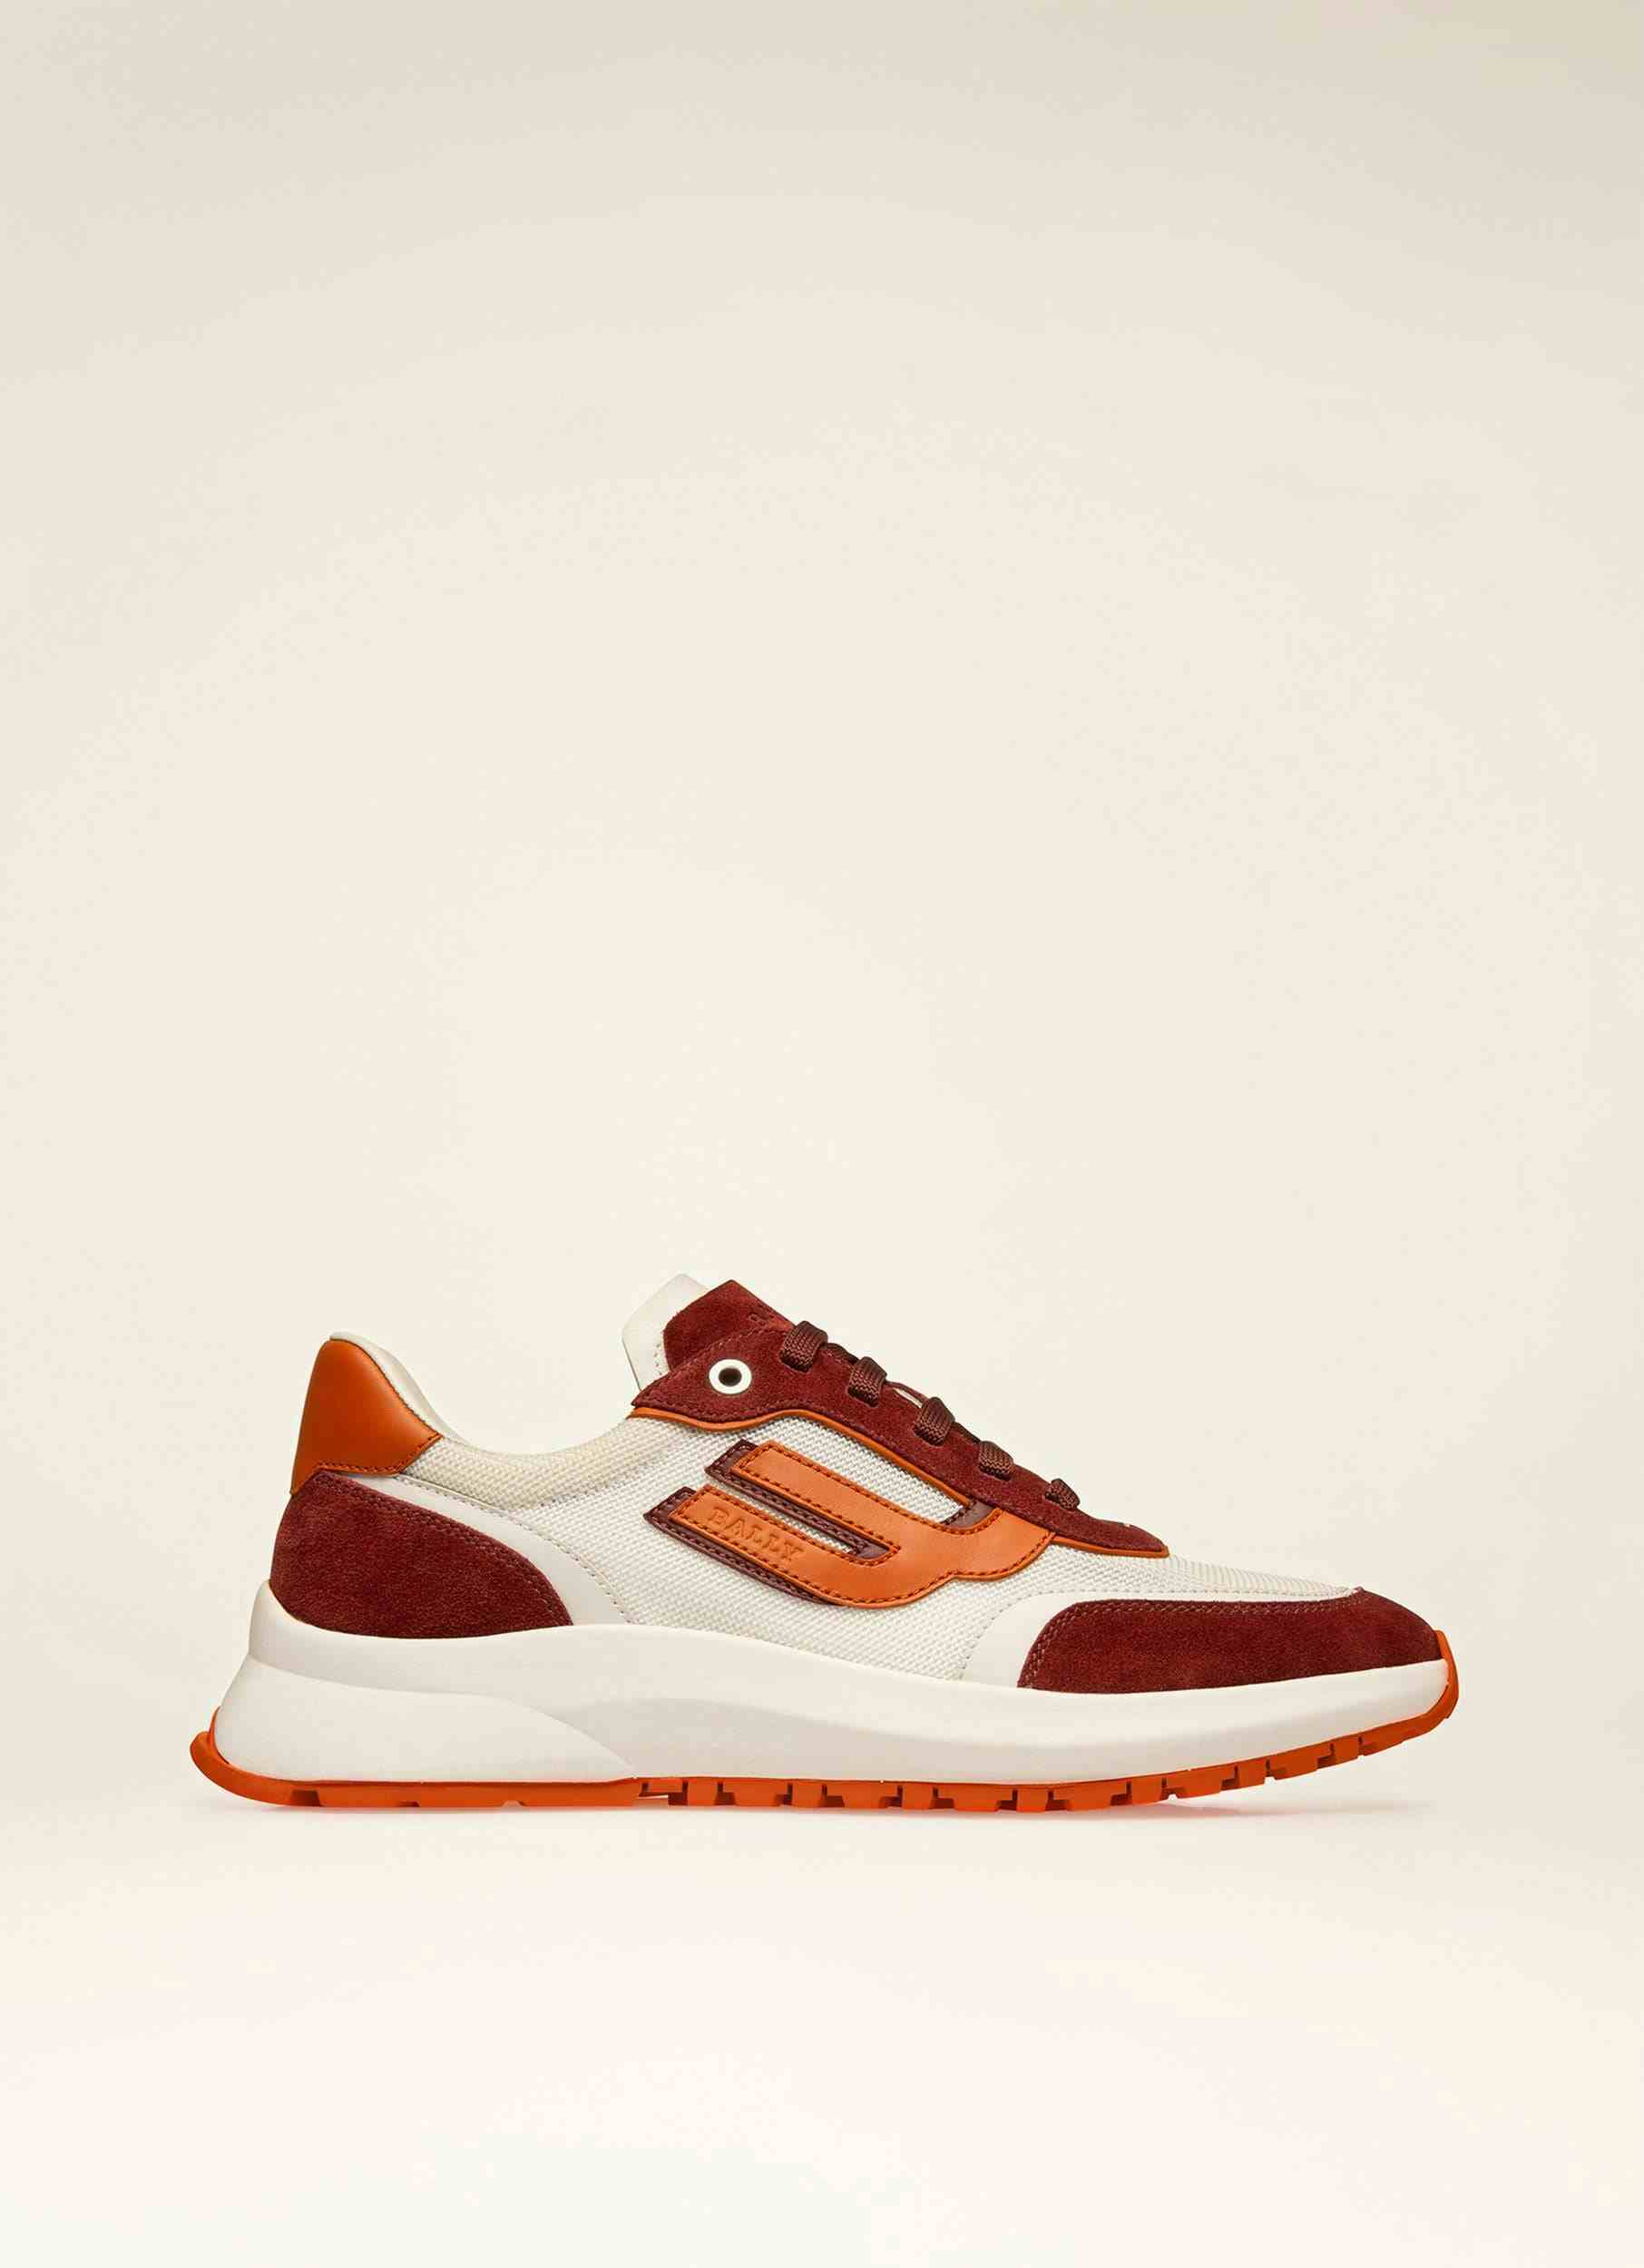 Demmy Mesh & Leather Sneakers In Heritage Red & White - Men's - Bally